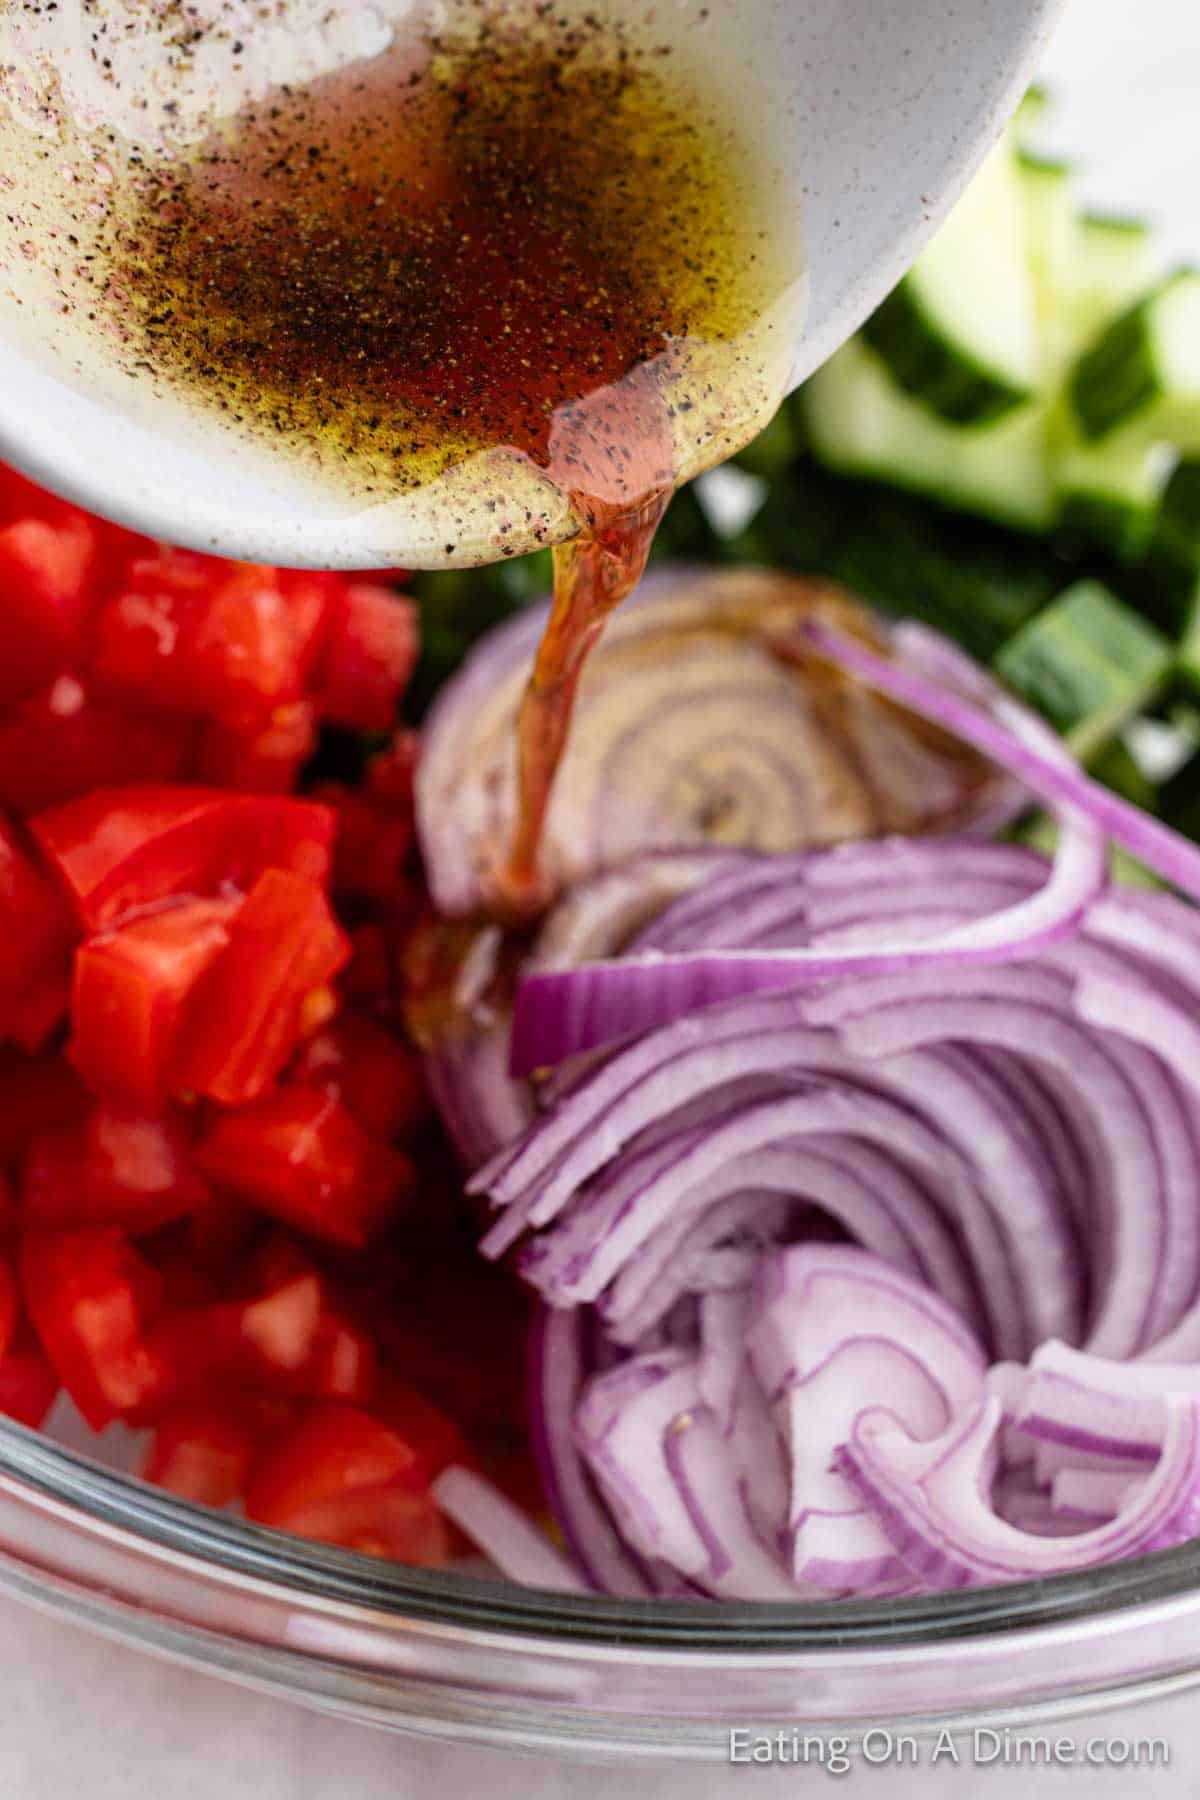 Pouring dressing over the tomatoes and red onions